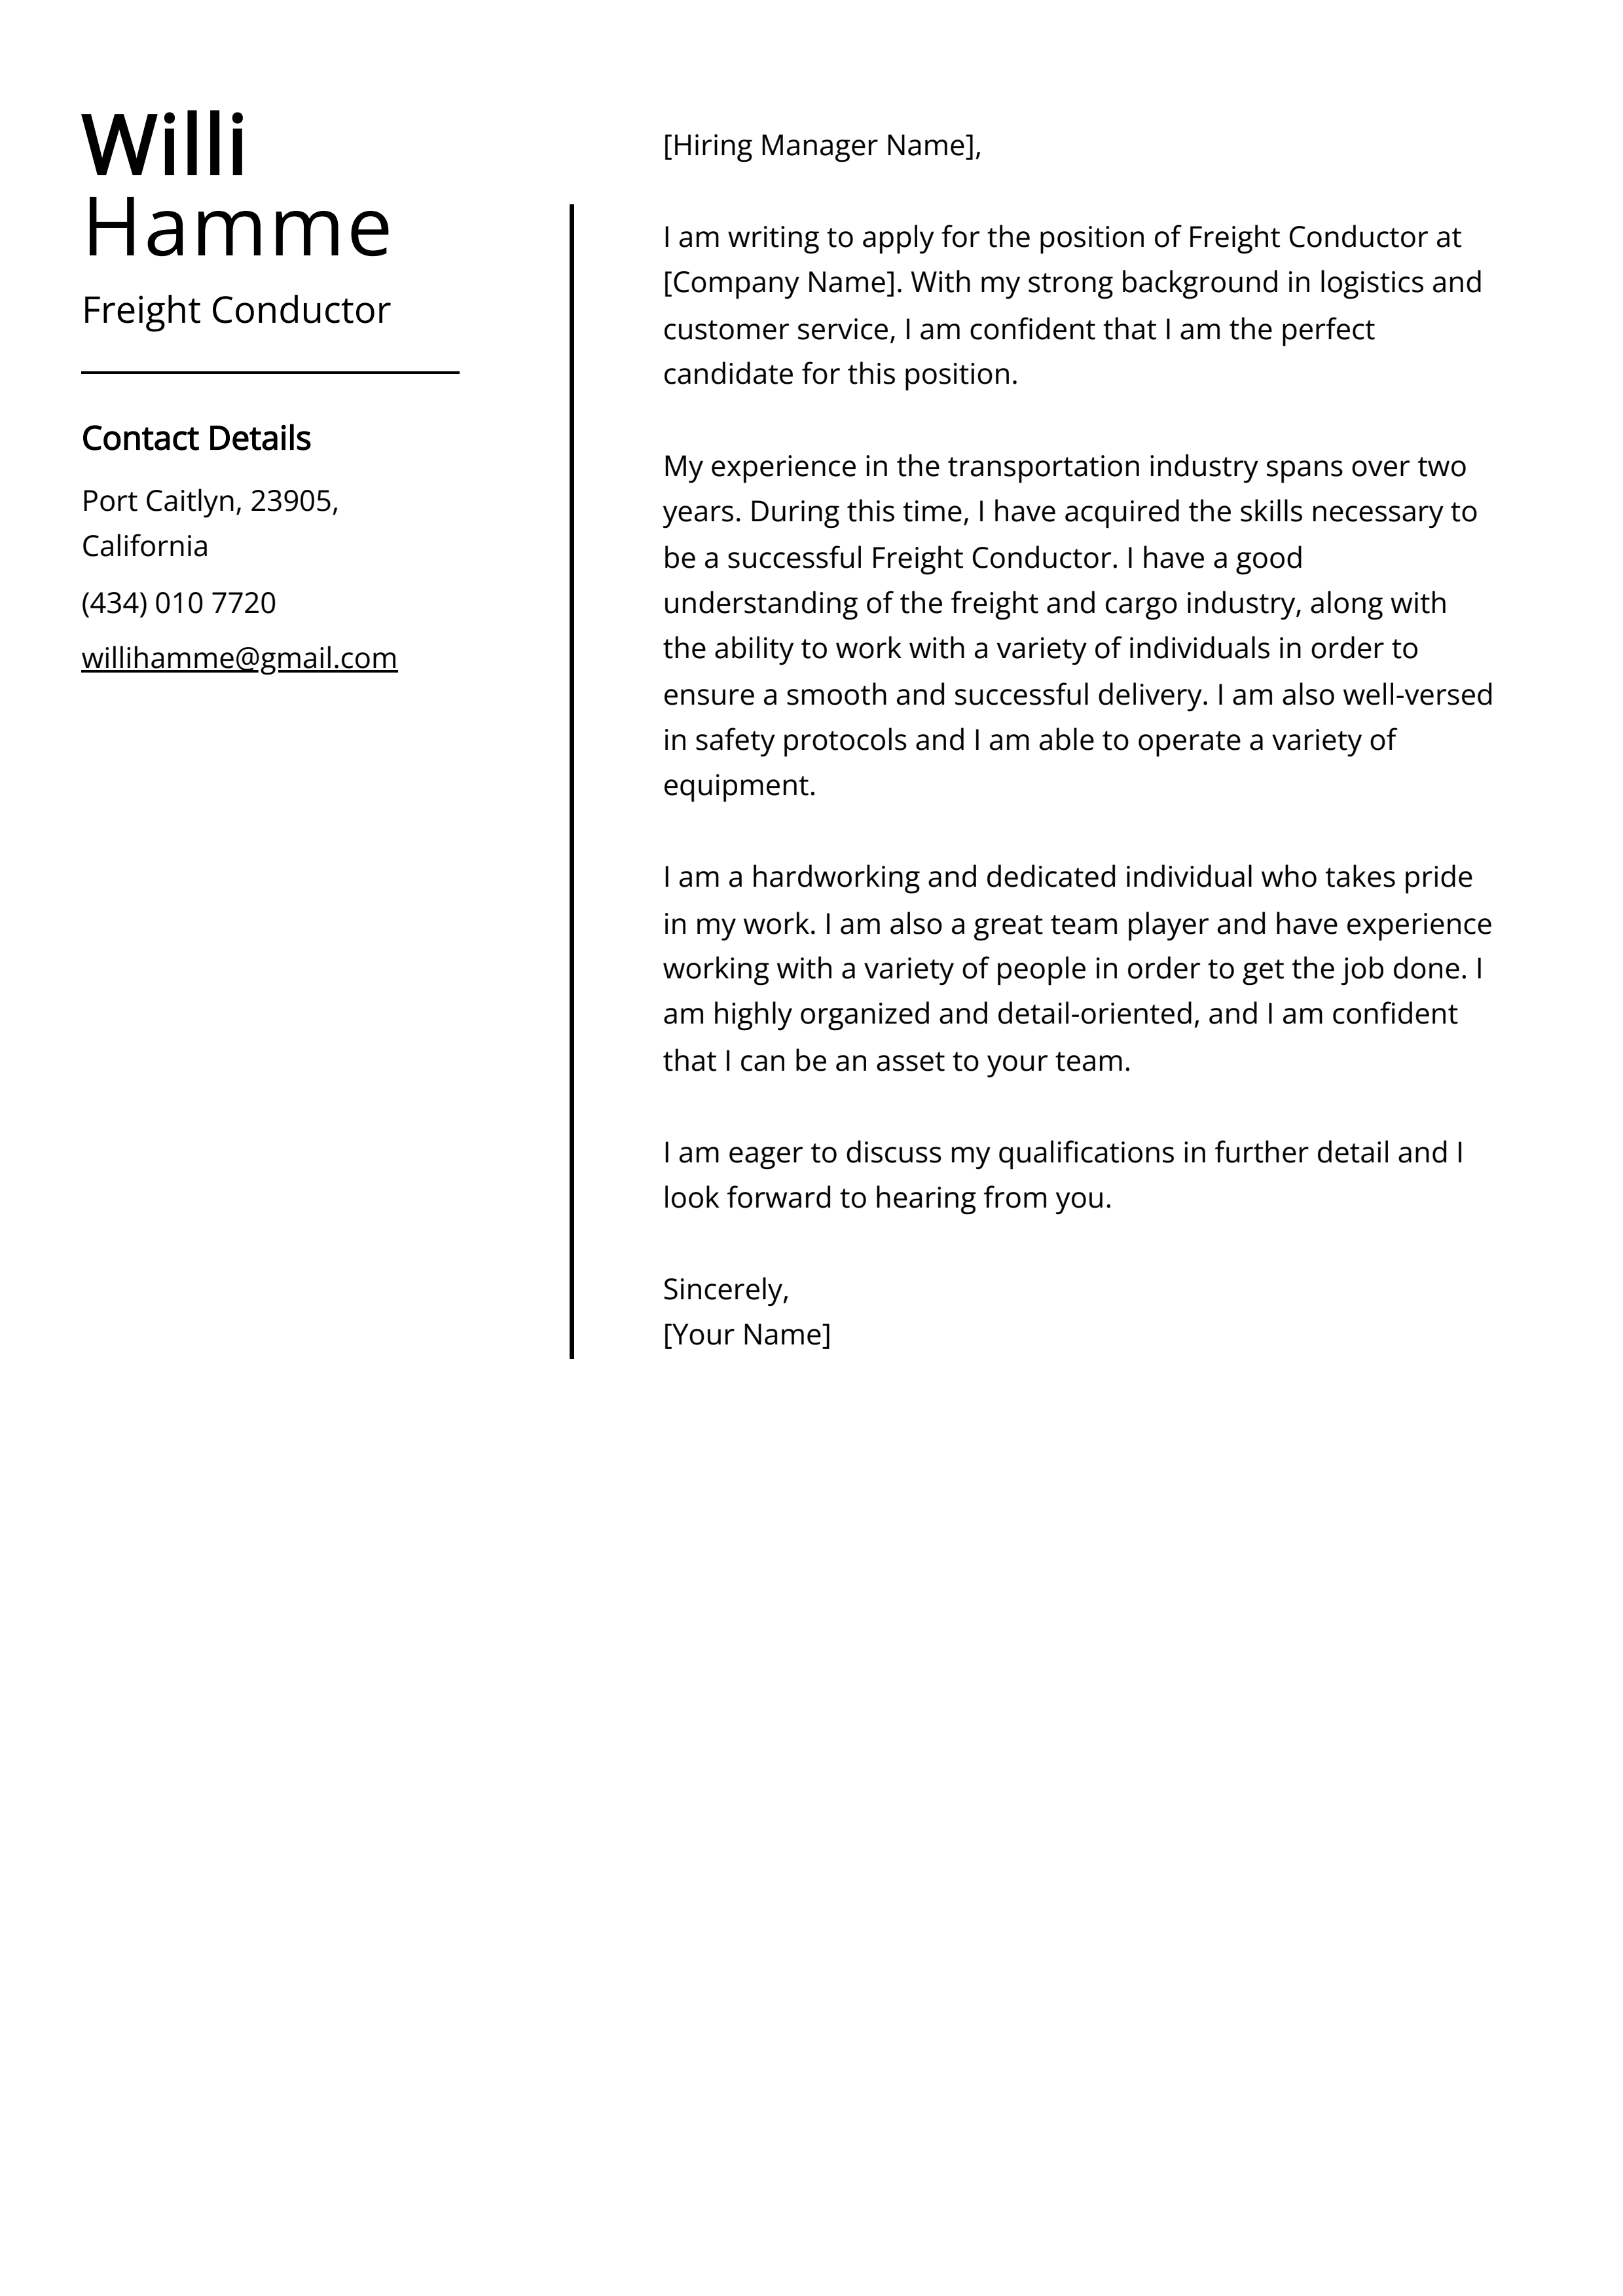 Freight Conductor Cover Letter Example